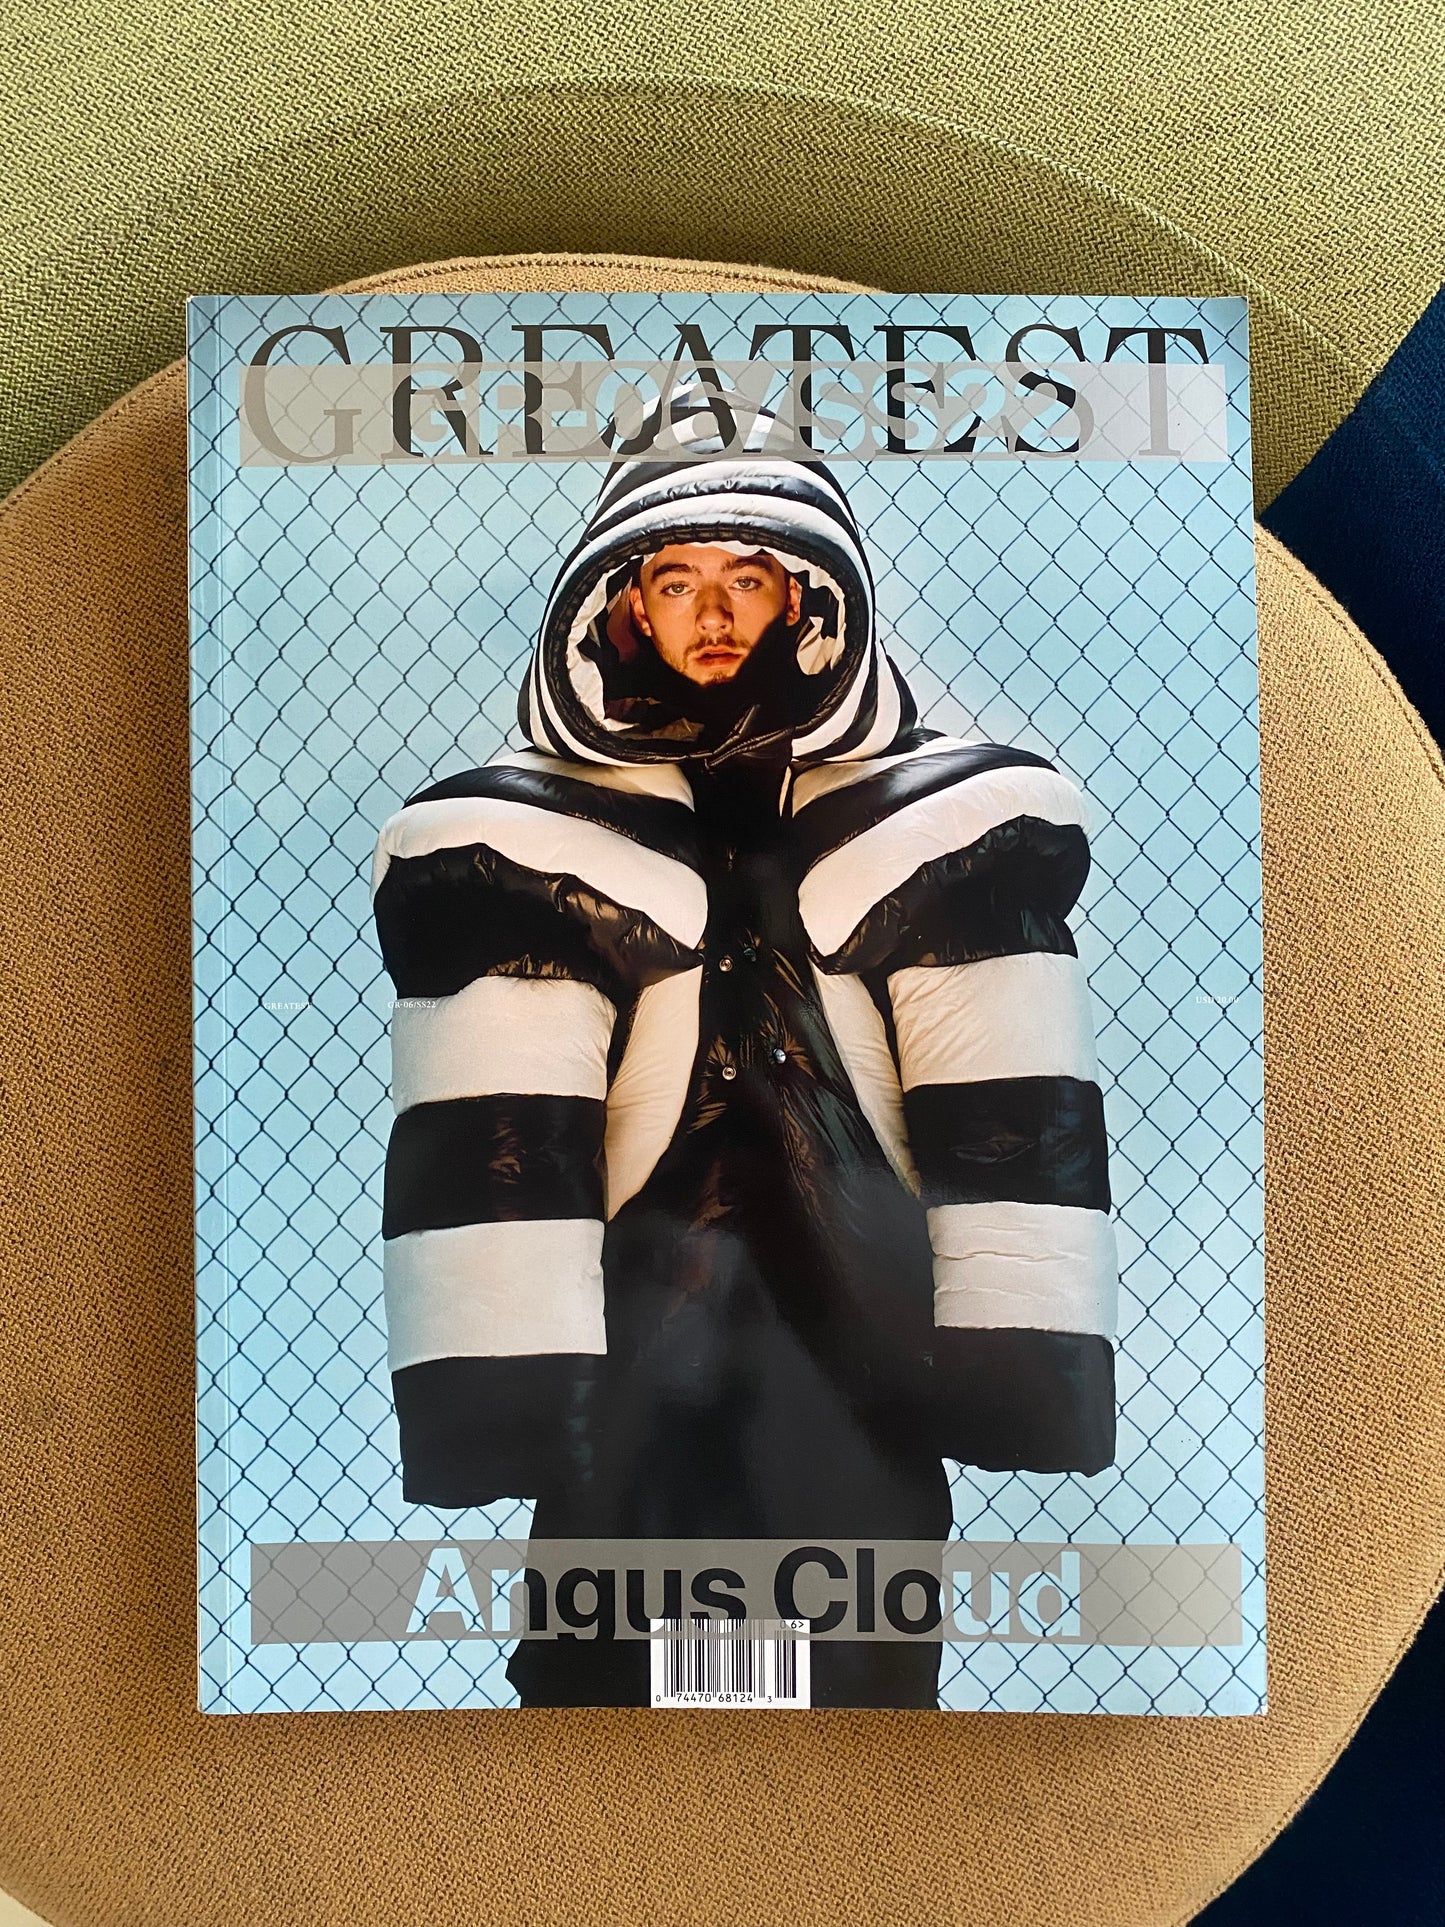 Greatest Issue 6: Angus Cloud